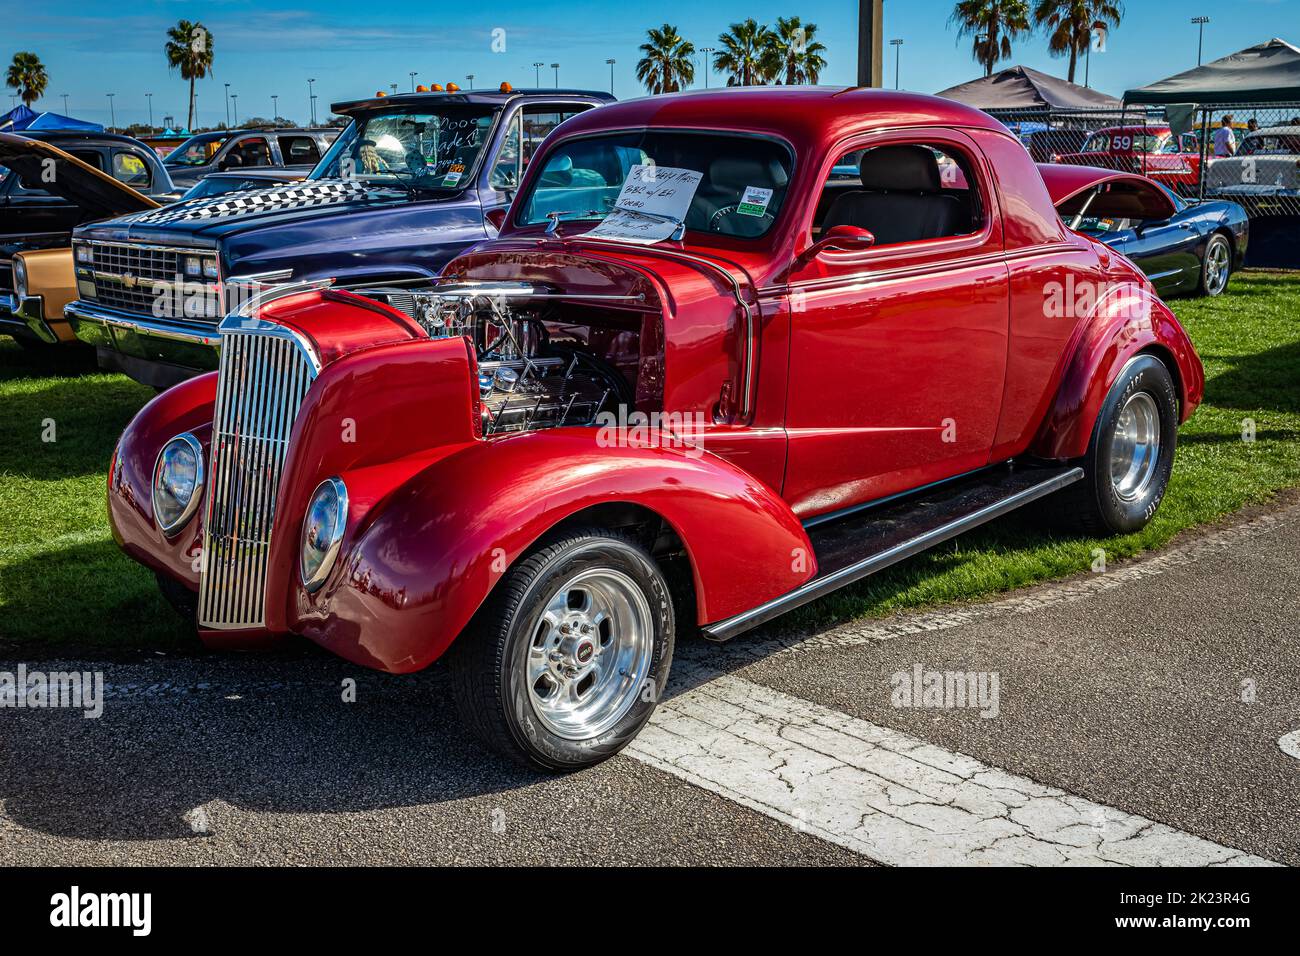 Daytona Beach, FL - November 28, 2020: High perspective front corner view of a 1937 Chevrolet Master Coupe at a local car show. Stock Photo